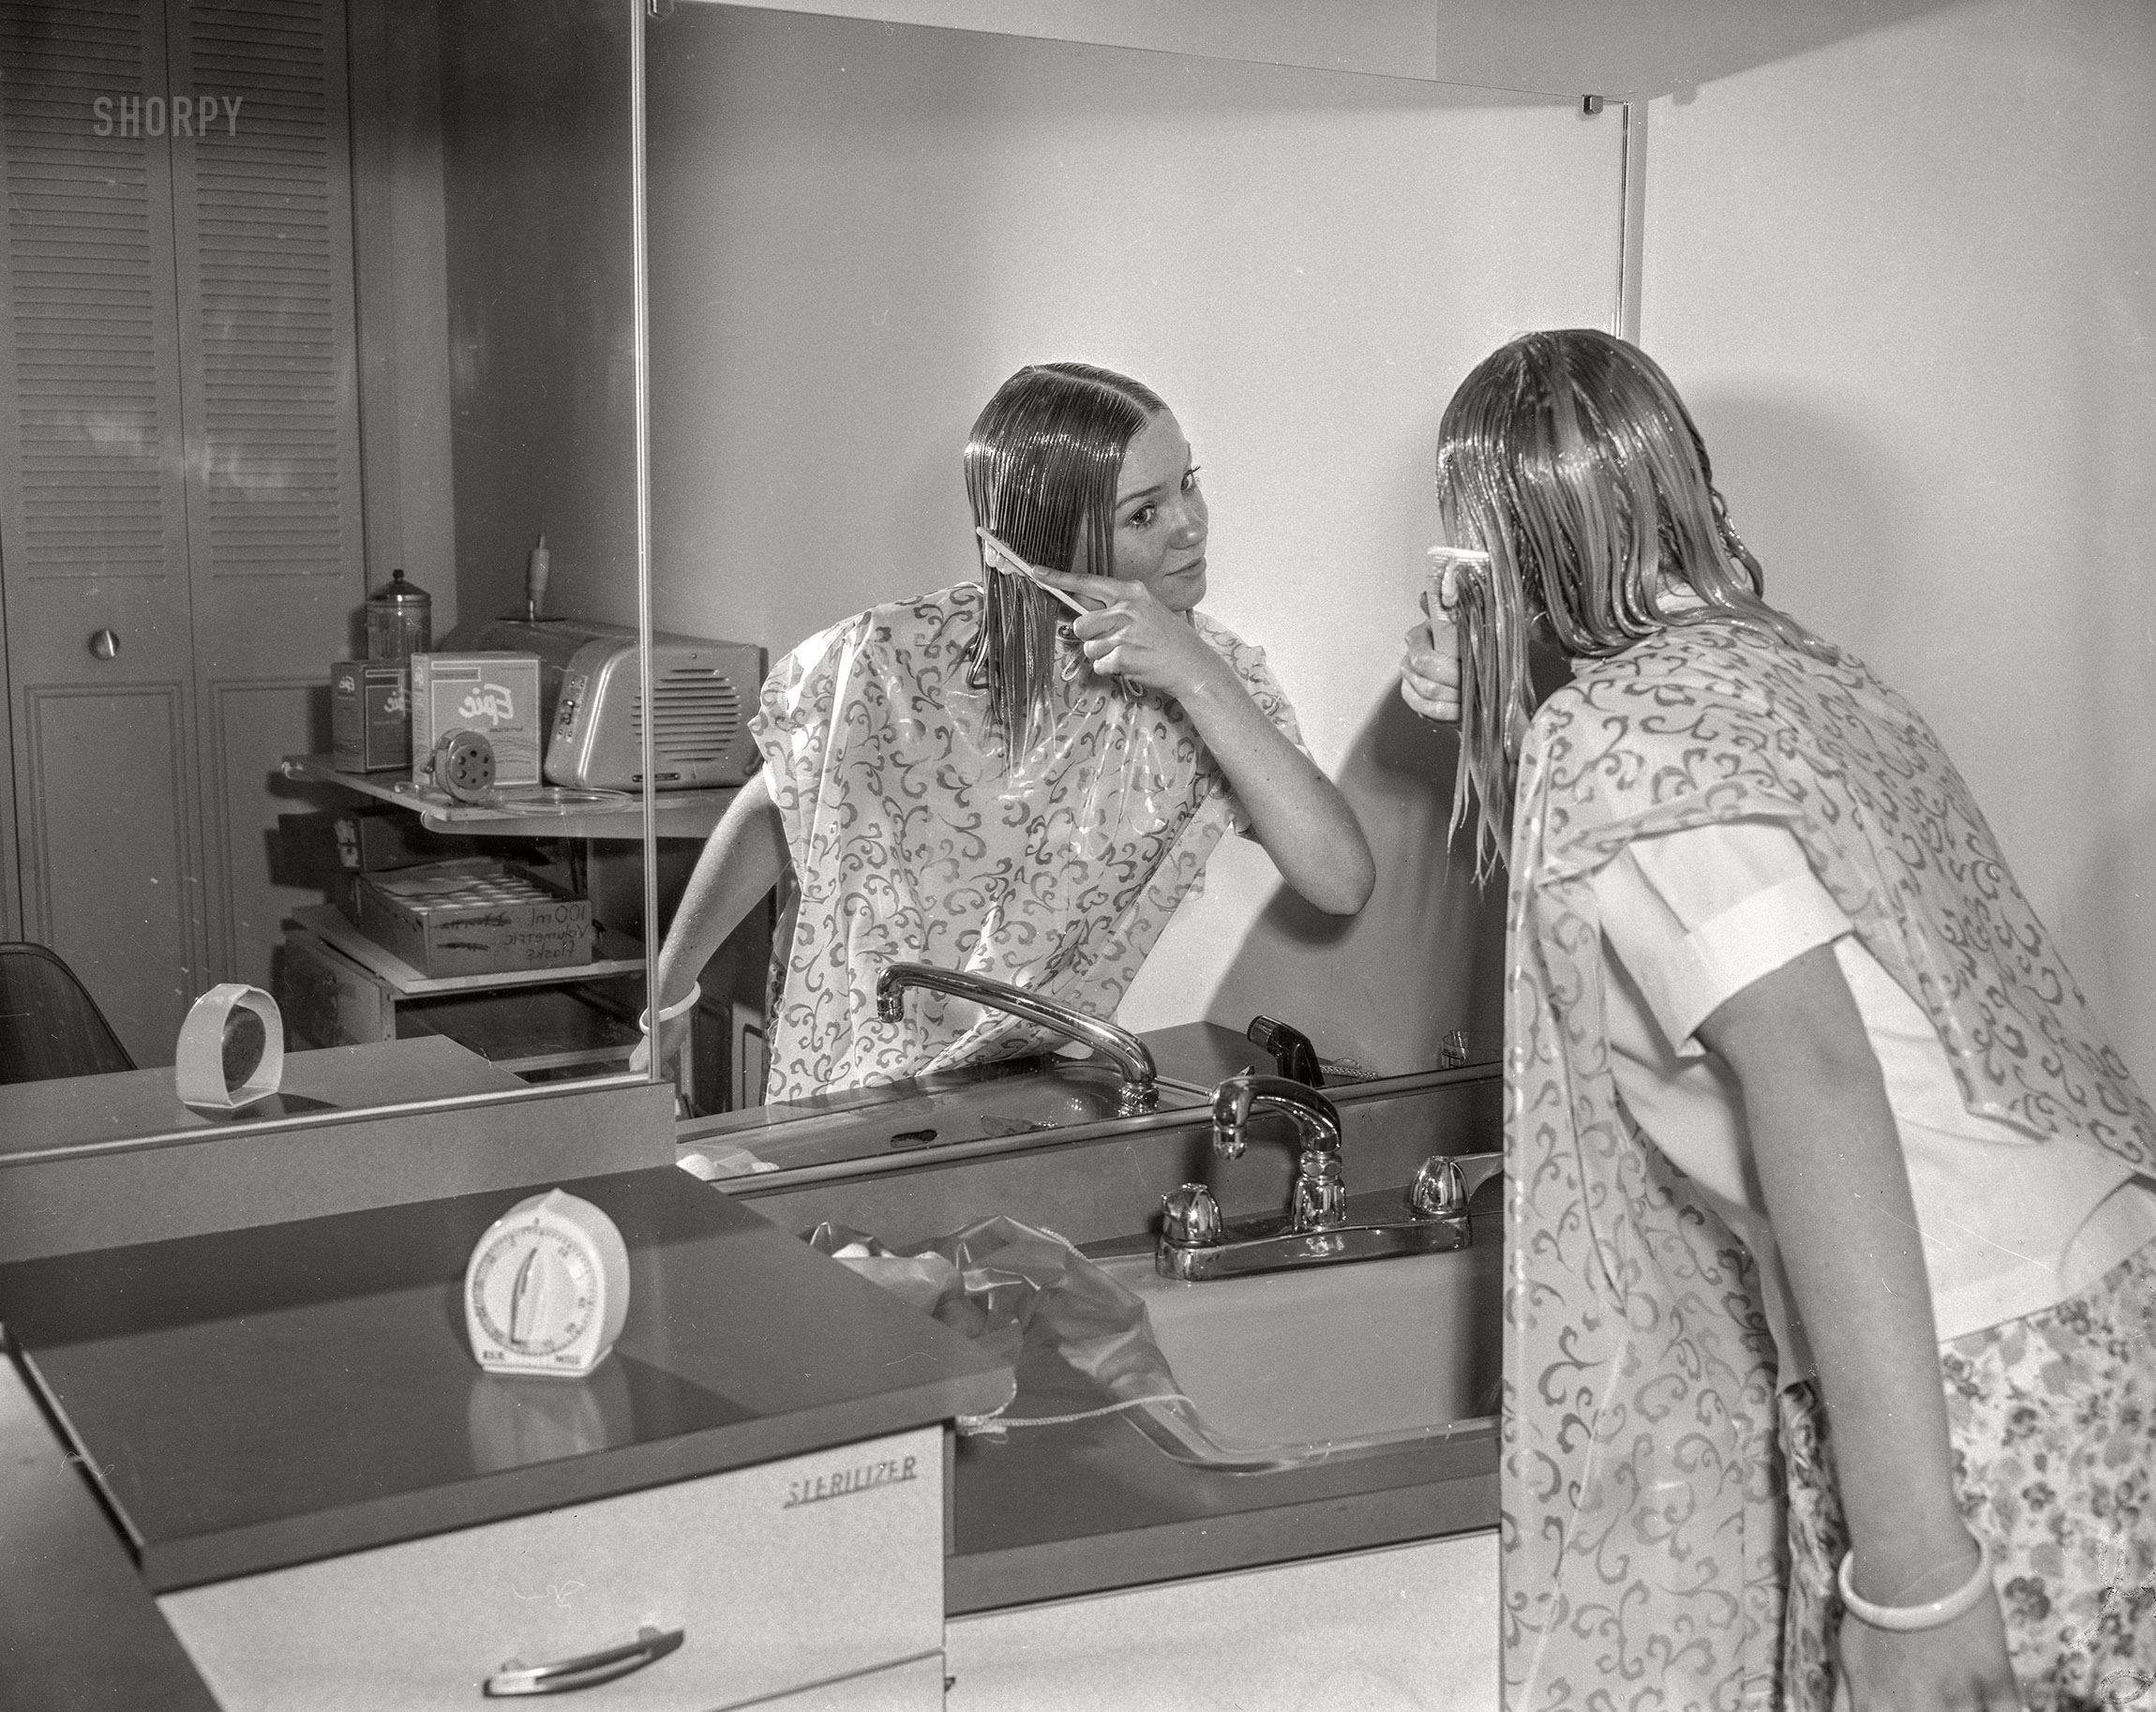 Chicago circa 1966. One in a series of photos dealing with cosmetology or hairdressing in a beauty parlor. The exercise here seems to be How to Straighten Yourself Out. 4x5 inch acetate negative from the Shorpy News Photo Archive. View full size.